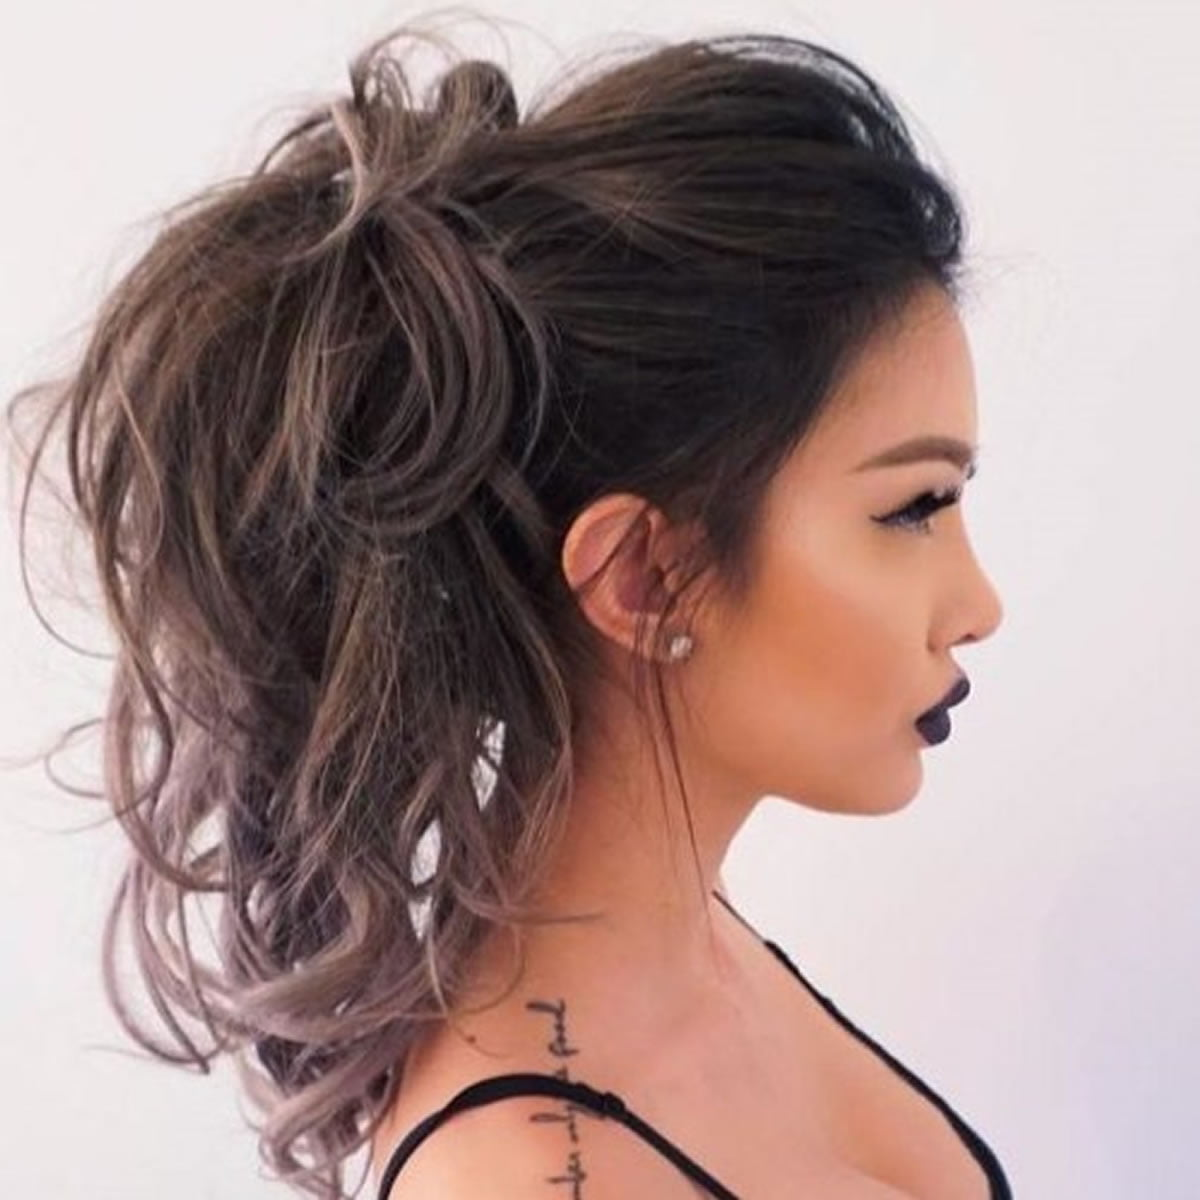 The rule to a perfect hairstyle is that there are no rules